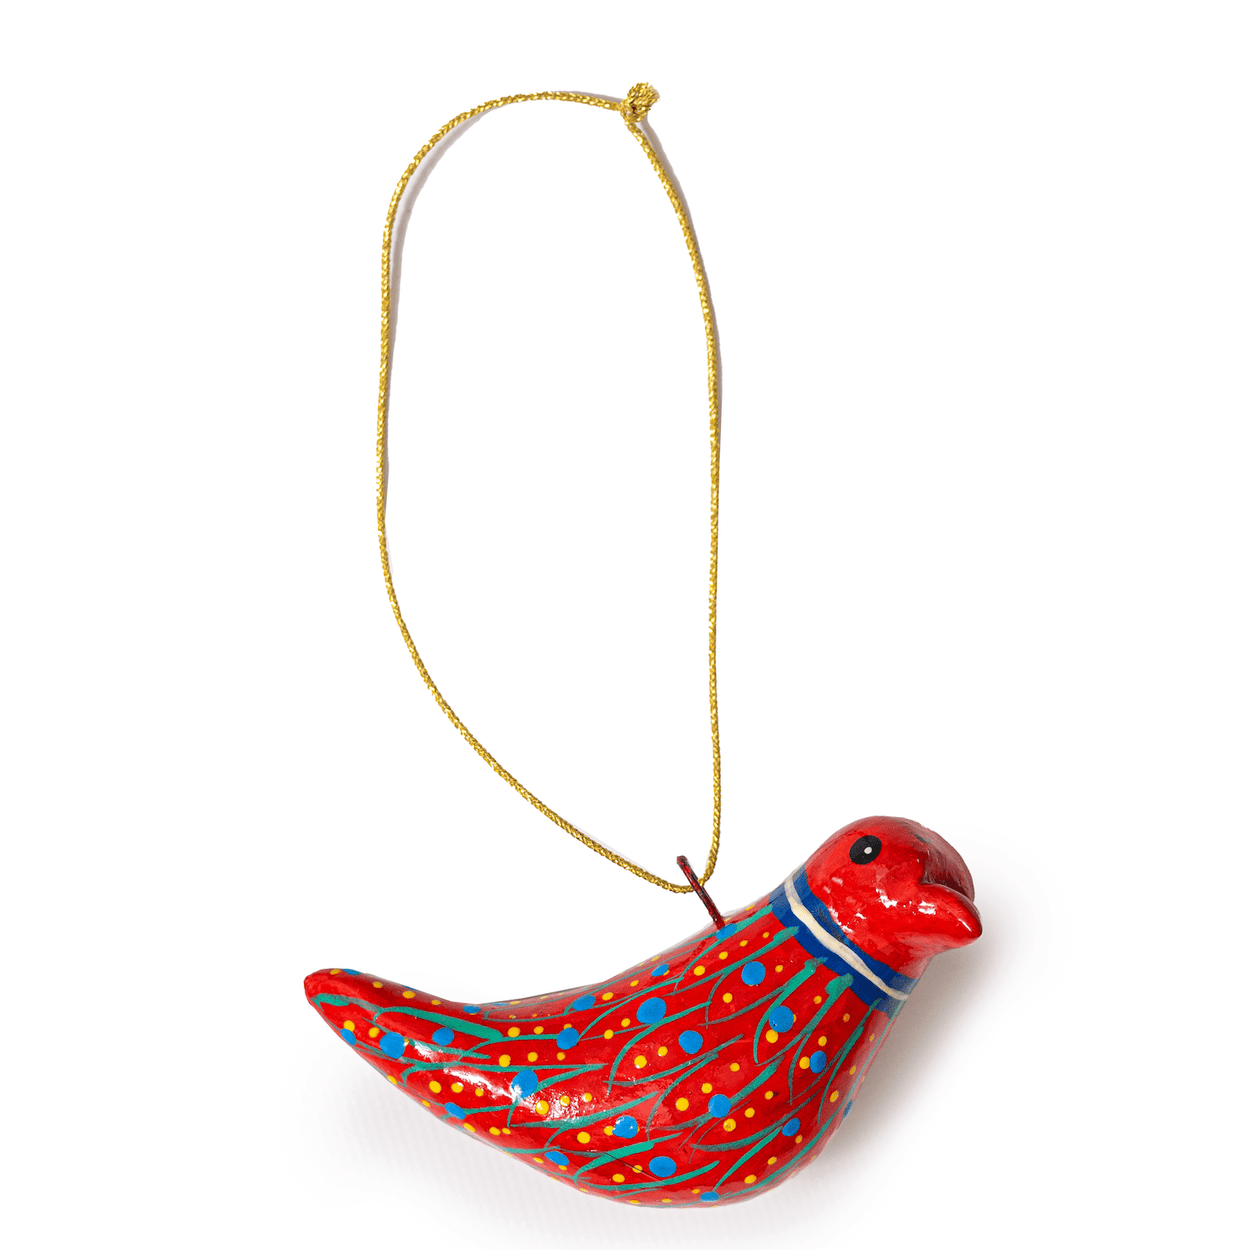 Terracotta Dove Ornaments: Blue Chirstmas Global Goods Partners 